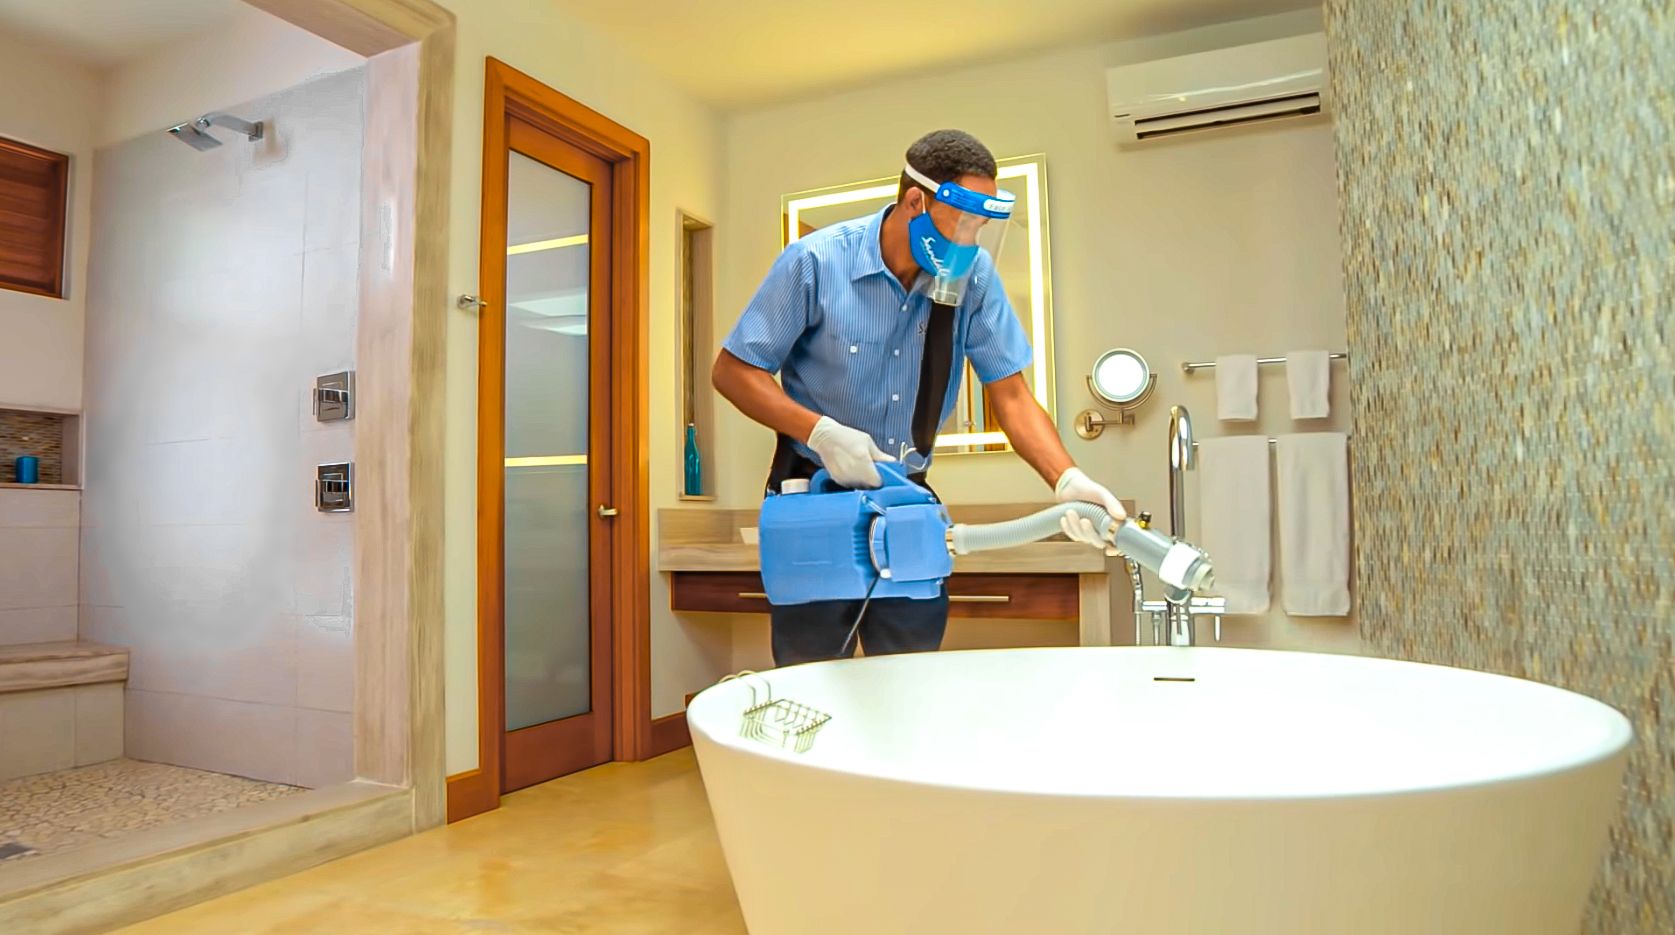 Sandals-Resorts-Cleaning-Protocols